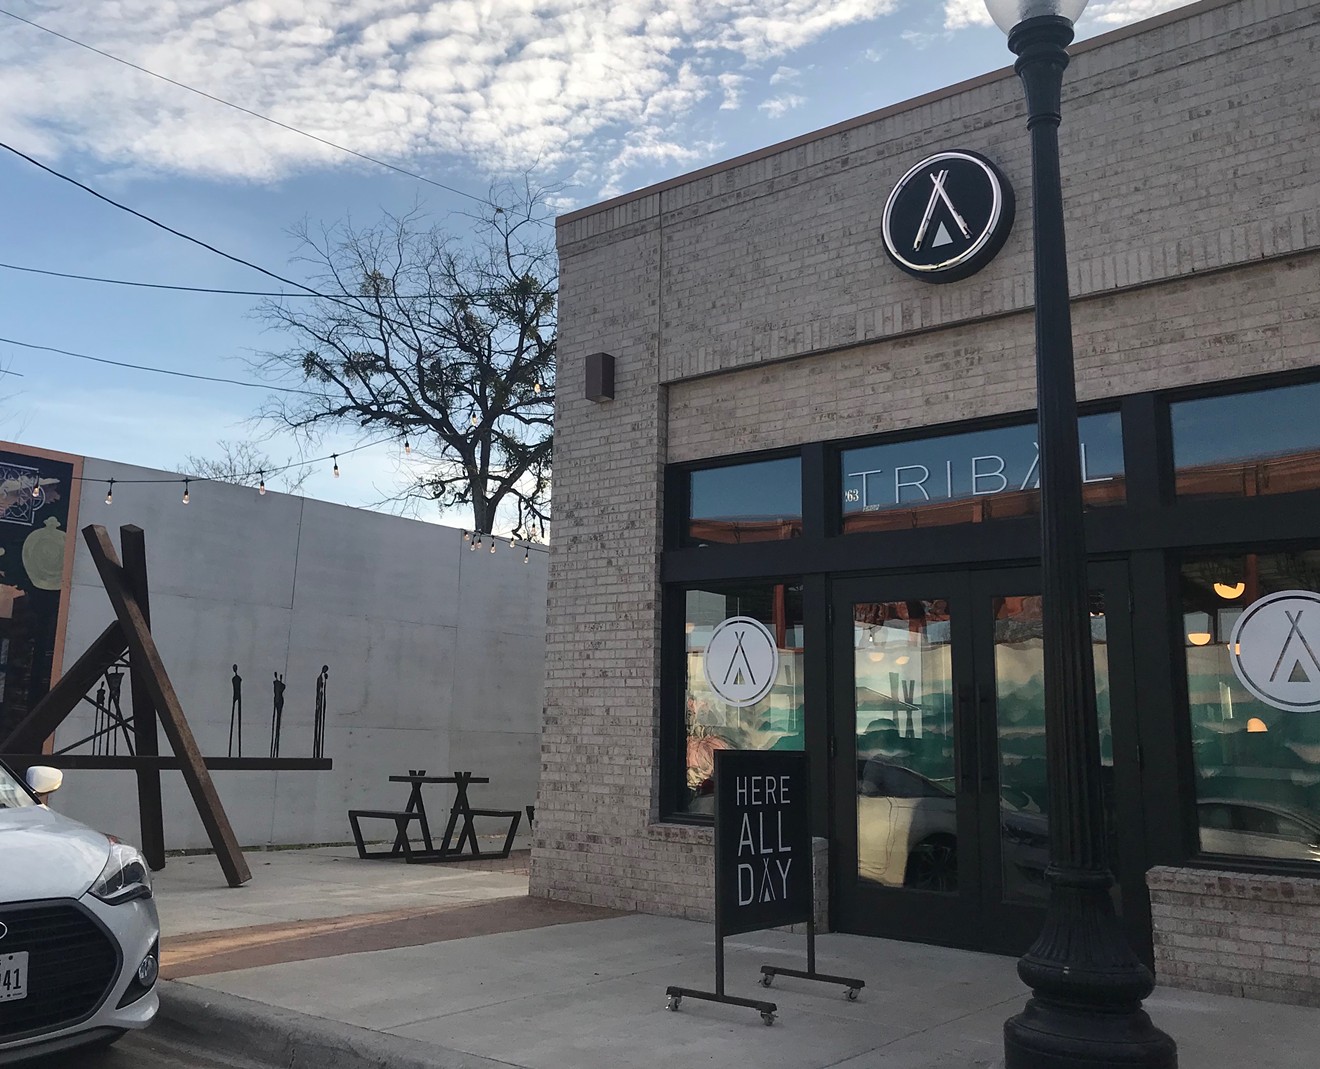 Tribal All Day Cafe, a local concept from Dallas juice company Tribal, is the first business to open in one of the new buildings being erected in New Bishop Arts.